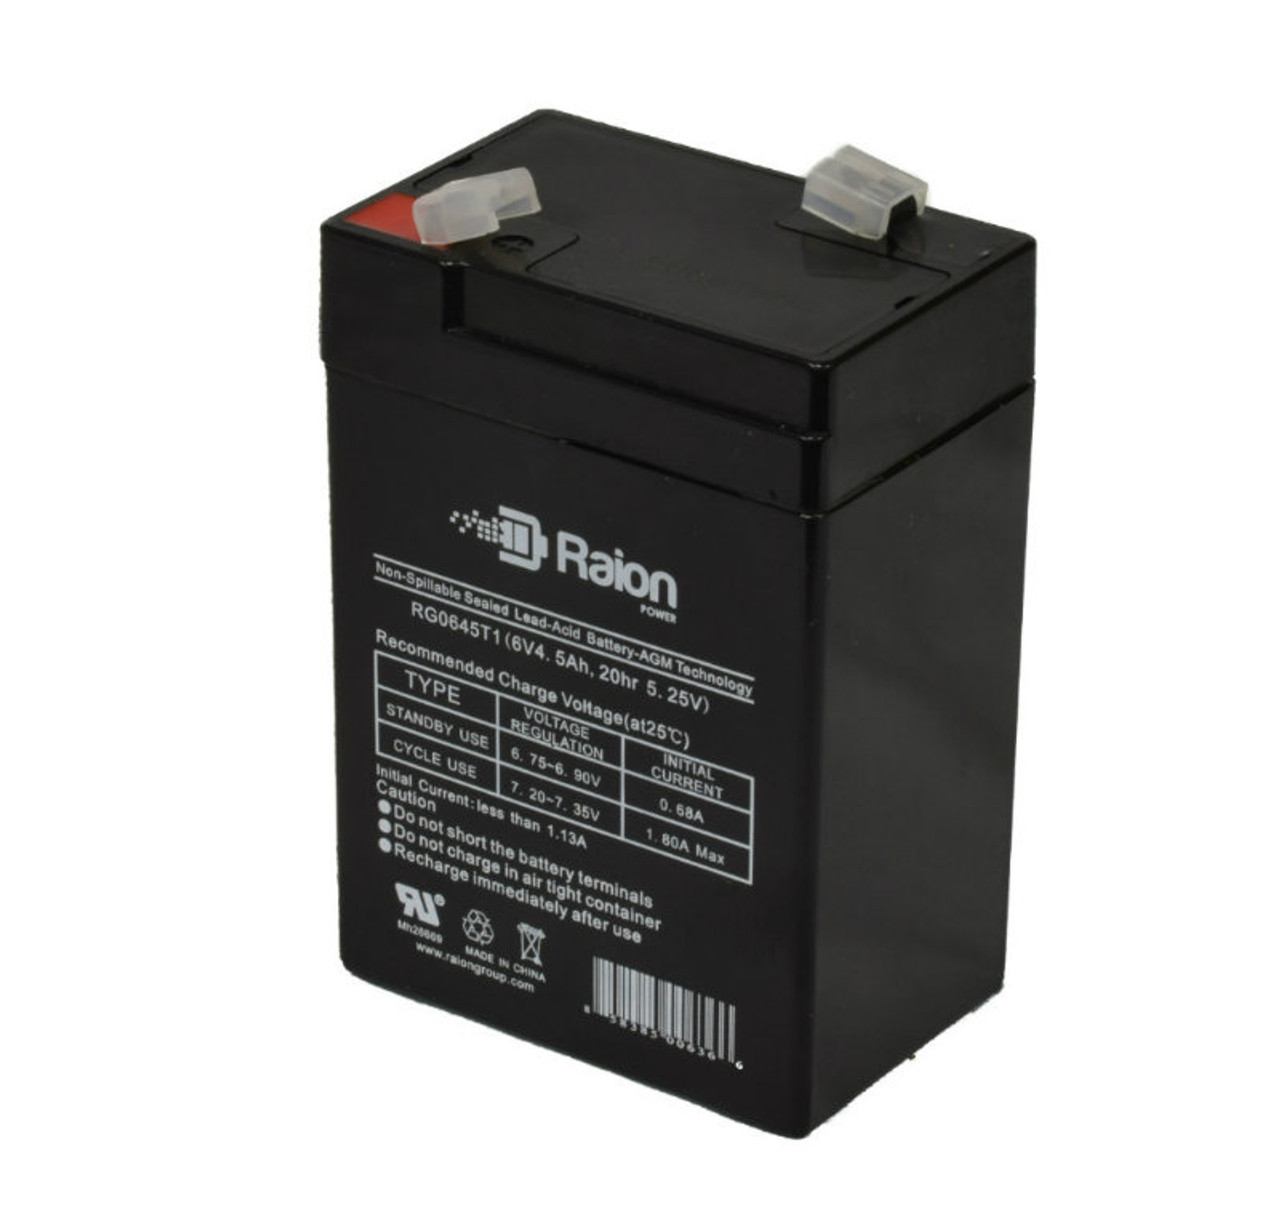 Raion Power RG0645T1 6V 4.5Ah Replacement Battery Cartridge for Tork 420